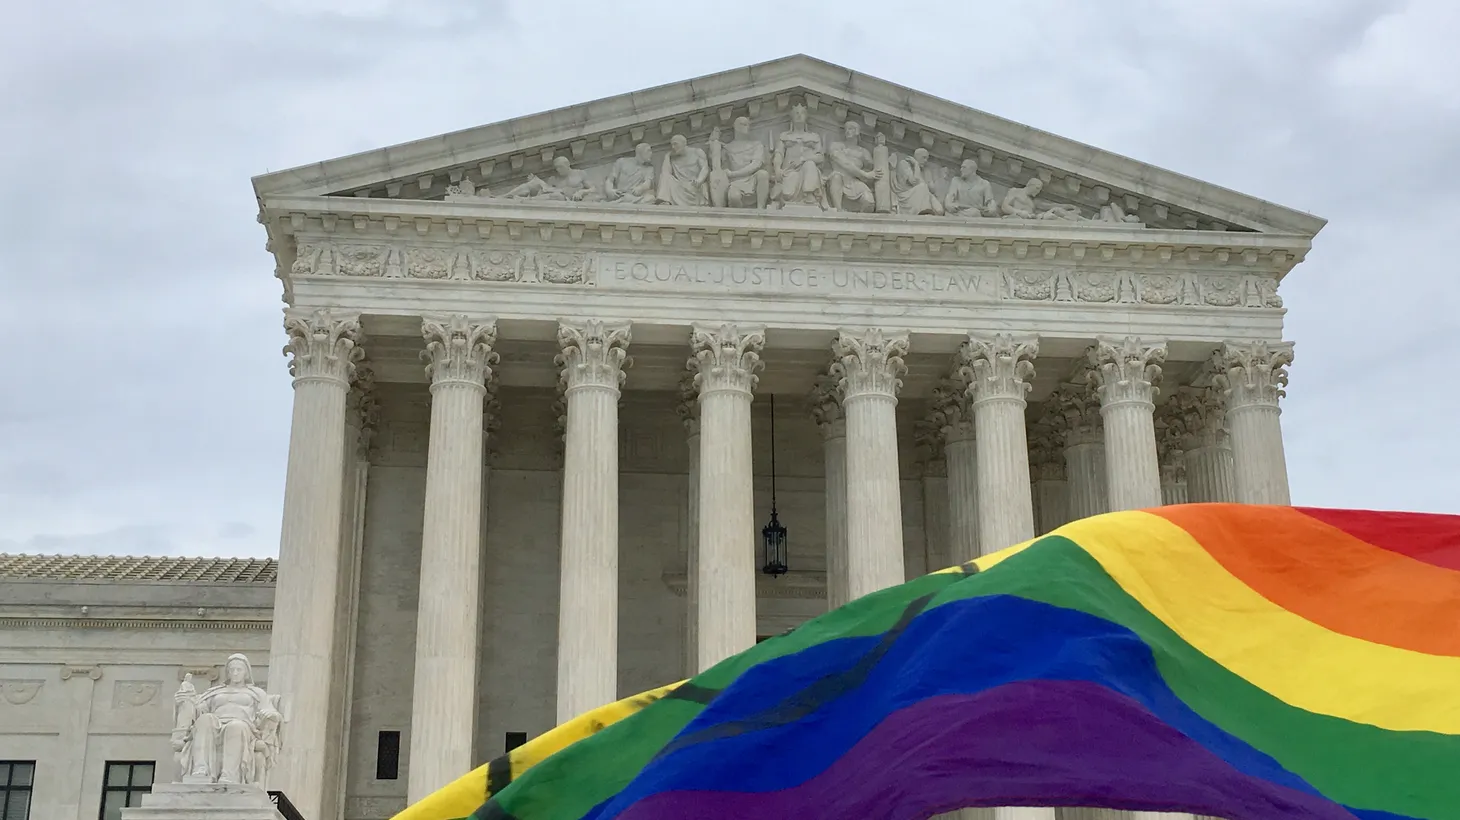 The U.S. Supreme Court seems ready to side with a Colorado web designer who says she has the right to refuse creating wedding websites for same-sex couples.